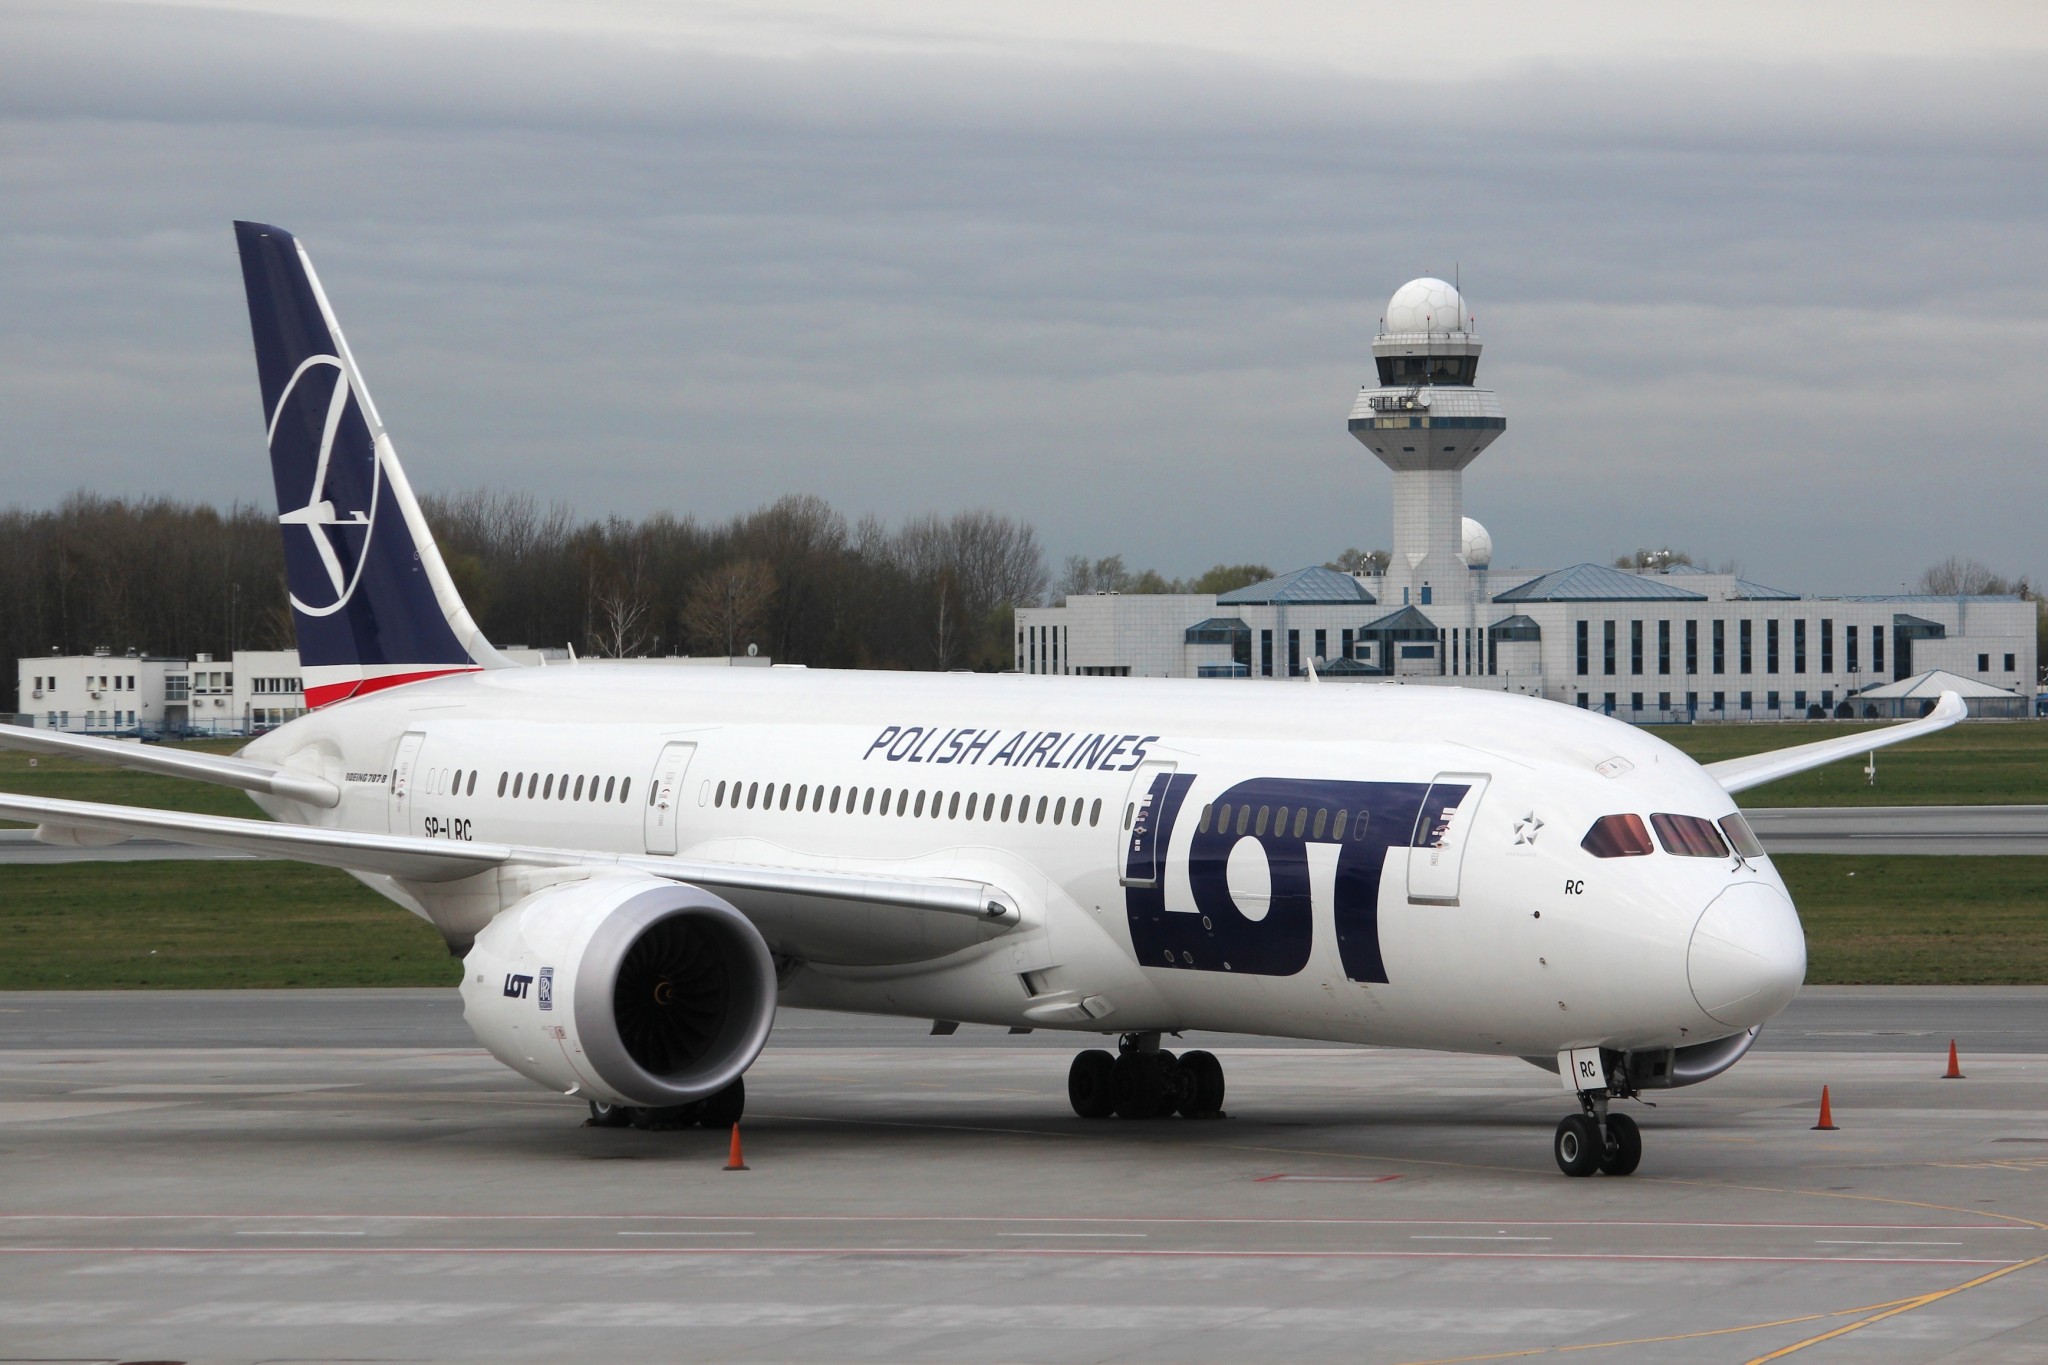 LOT will fly from Newark to Warsaw